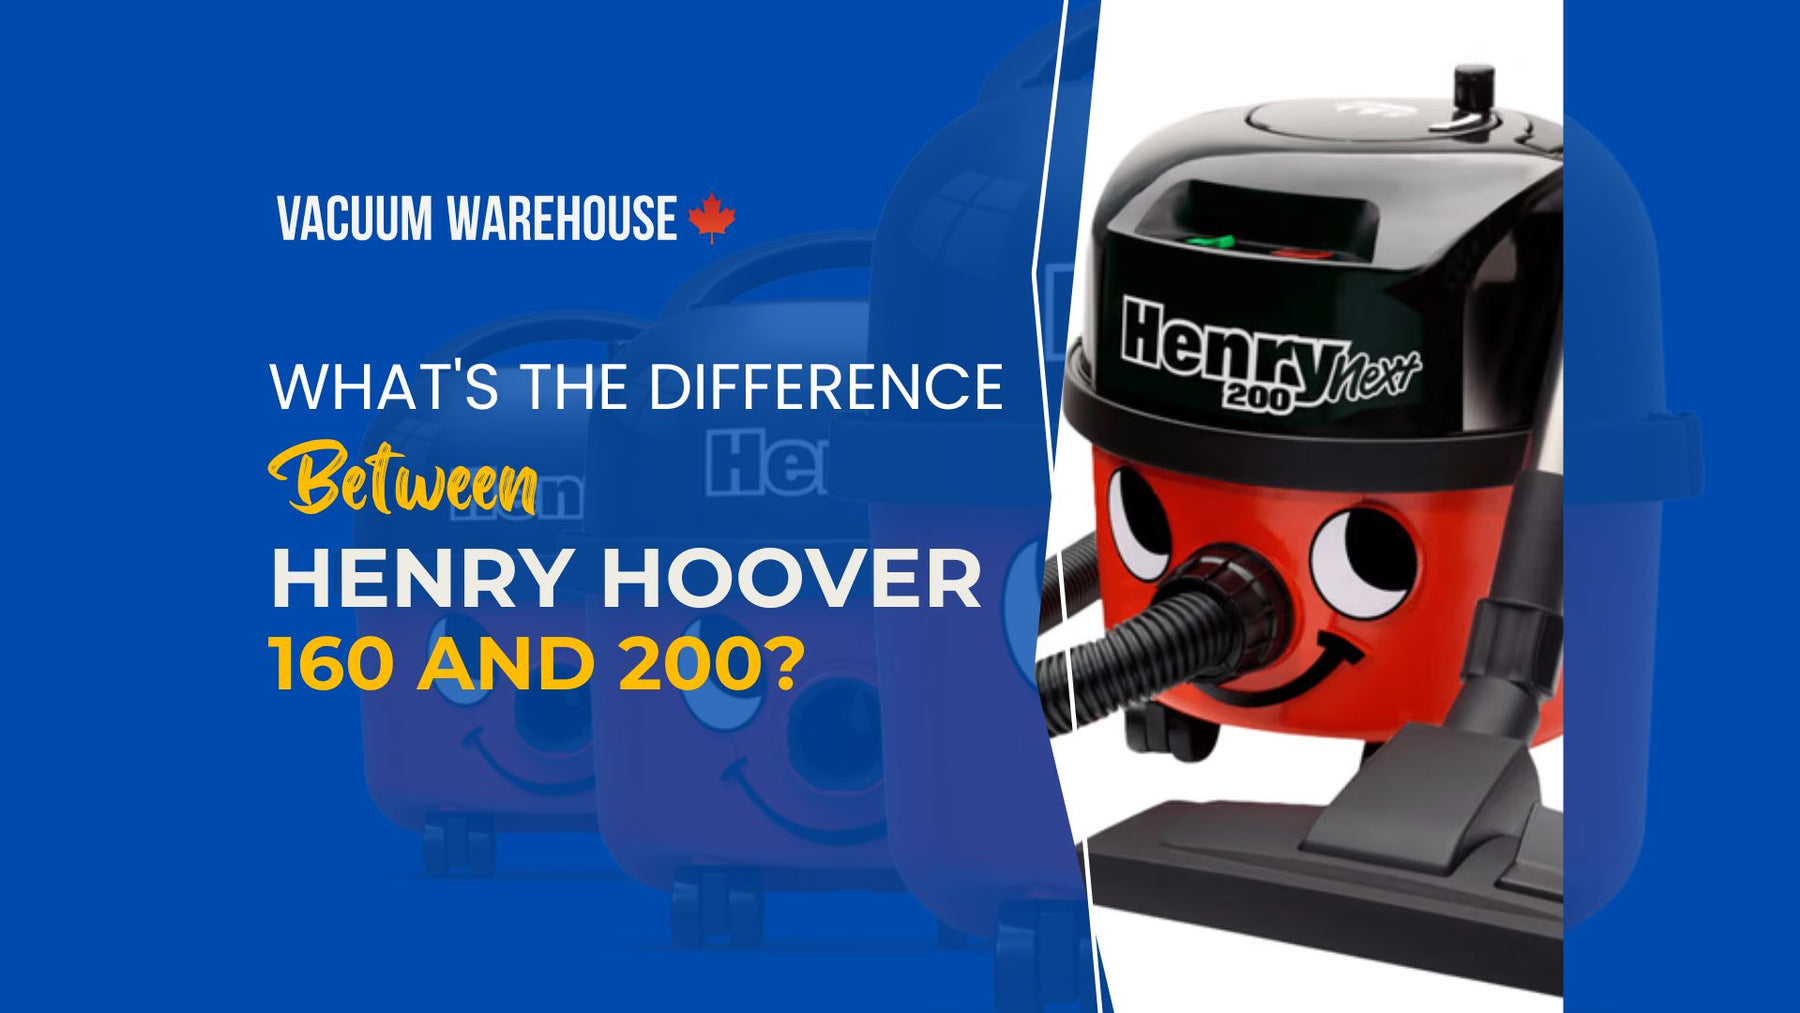 What's the difference between Henry 160 and Henry 200?